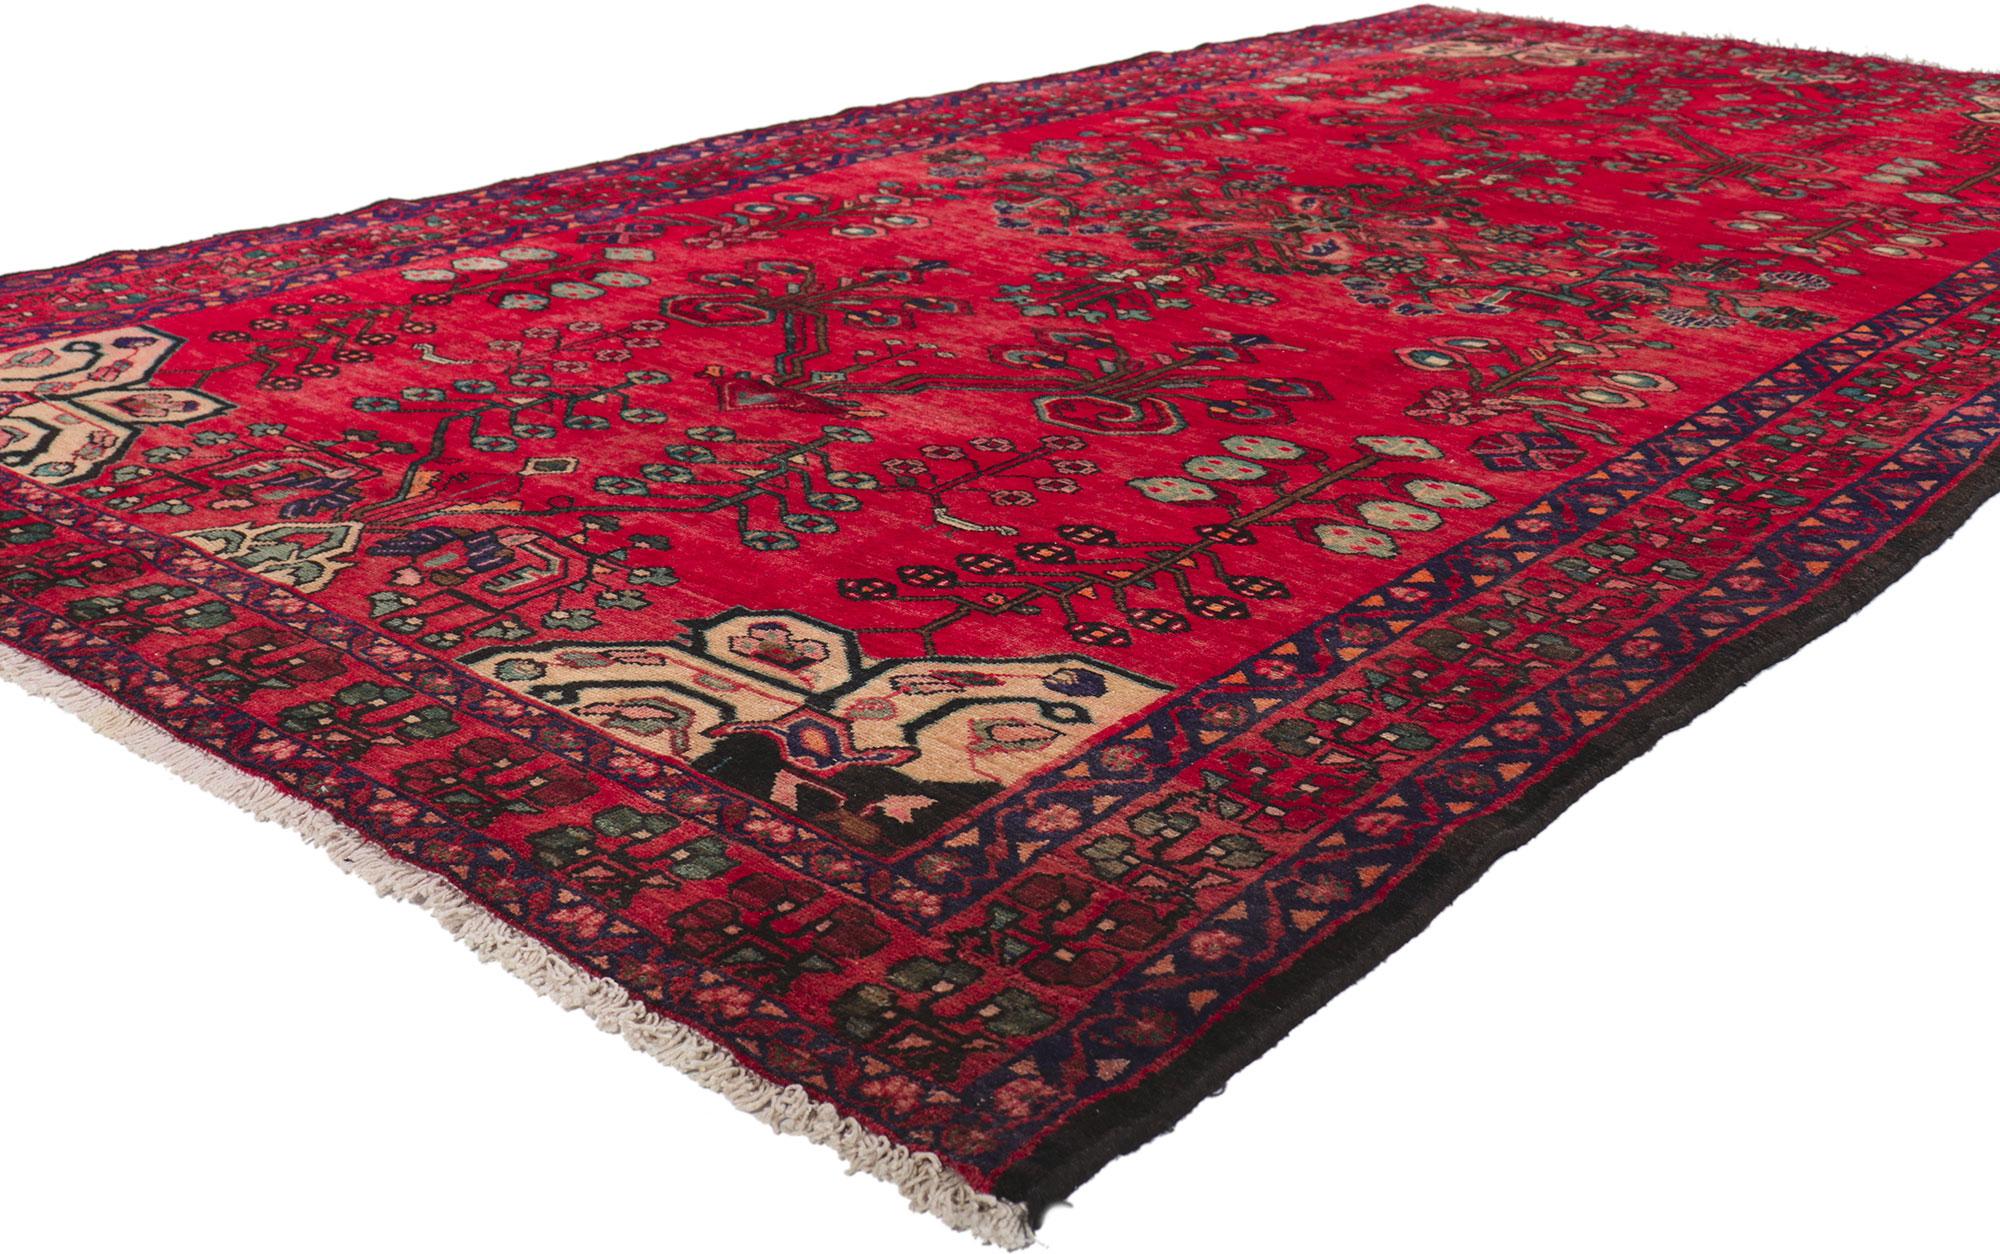 61176 Vintage Persian Lilihan Rug, 05'08 x 10'02. With its effortless beauty, incredible detail and texture, this hand knotted wool vintage Persian Lilihan gallery rug is a captivating vision of woven beauty. The timeless botanical design and